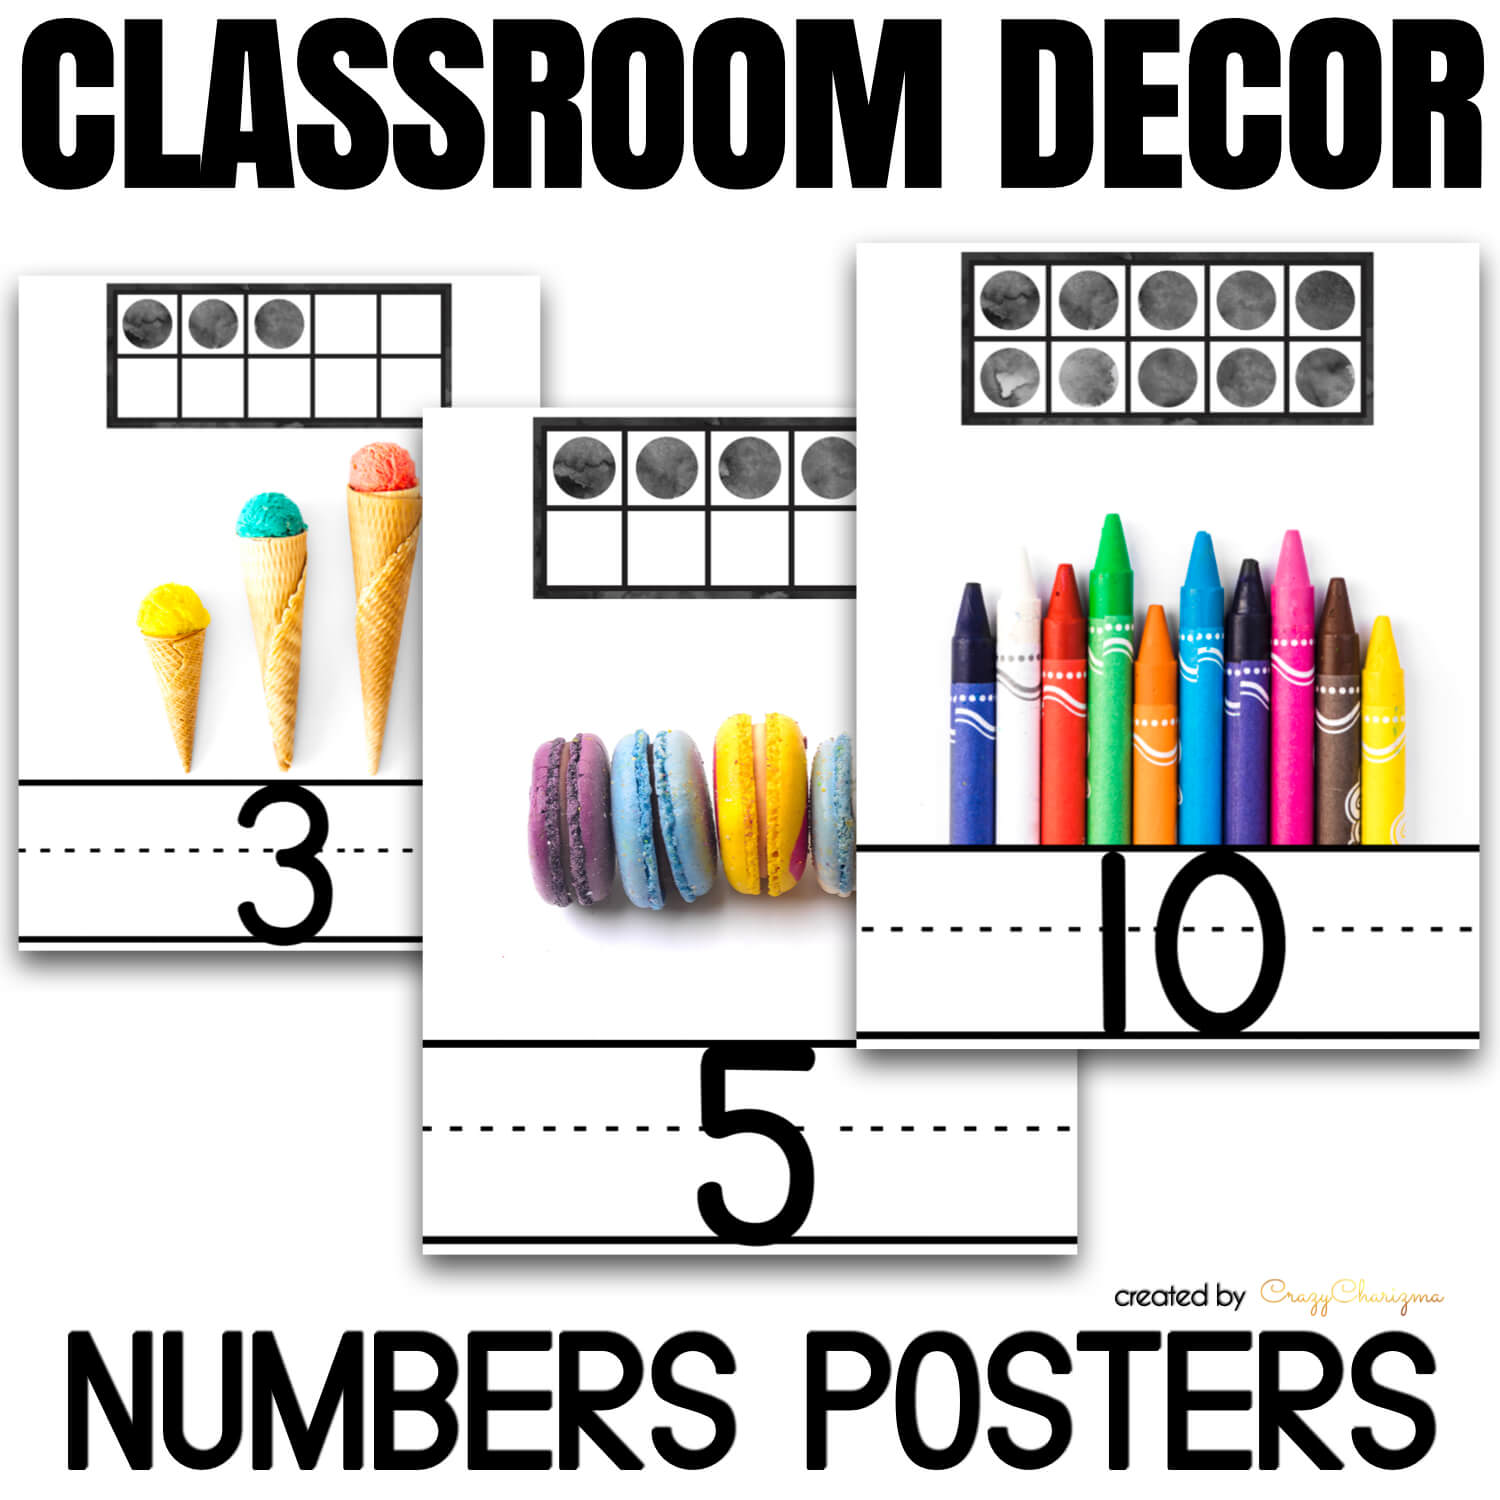 Use these bright number posters in your classroom or homeschool.